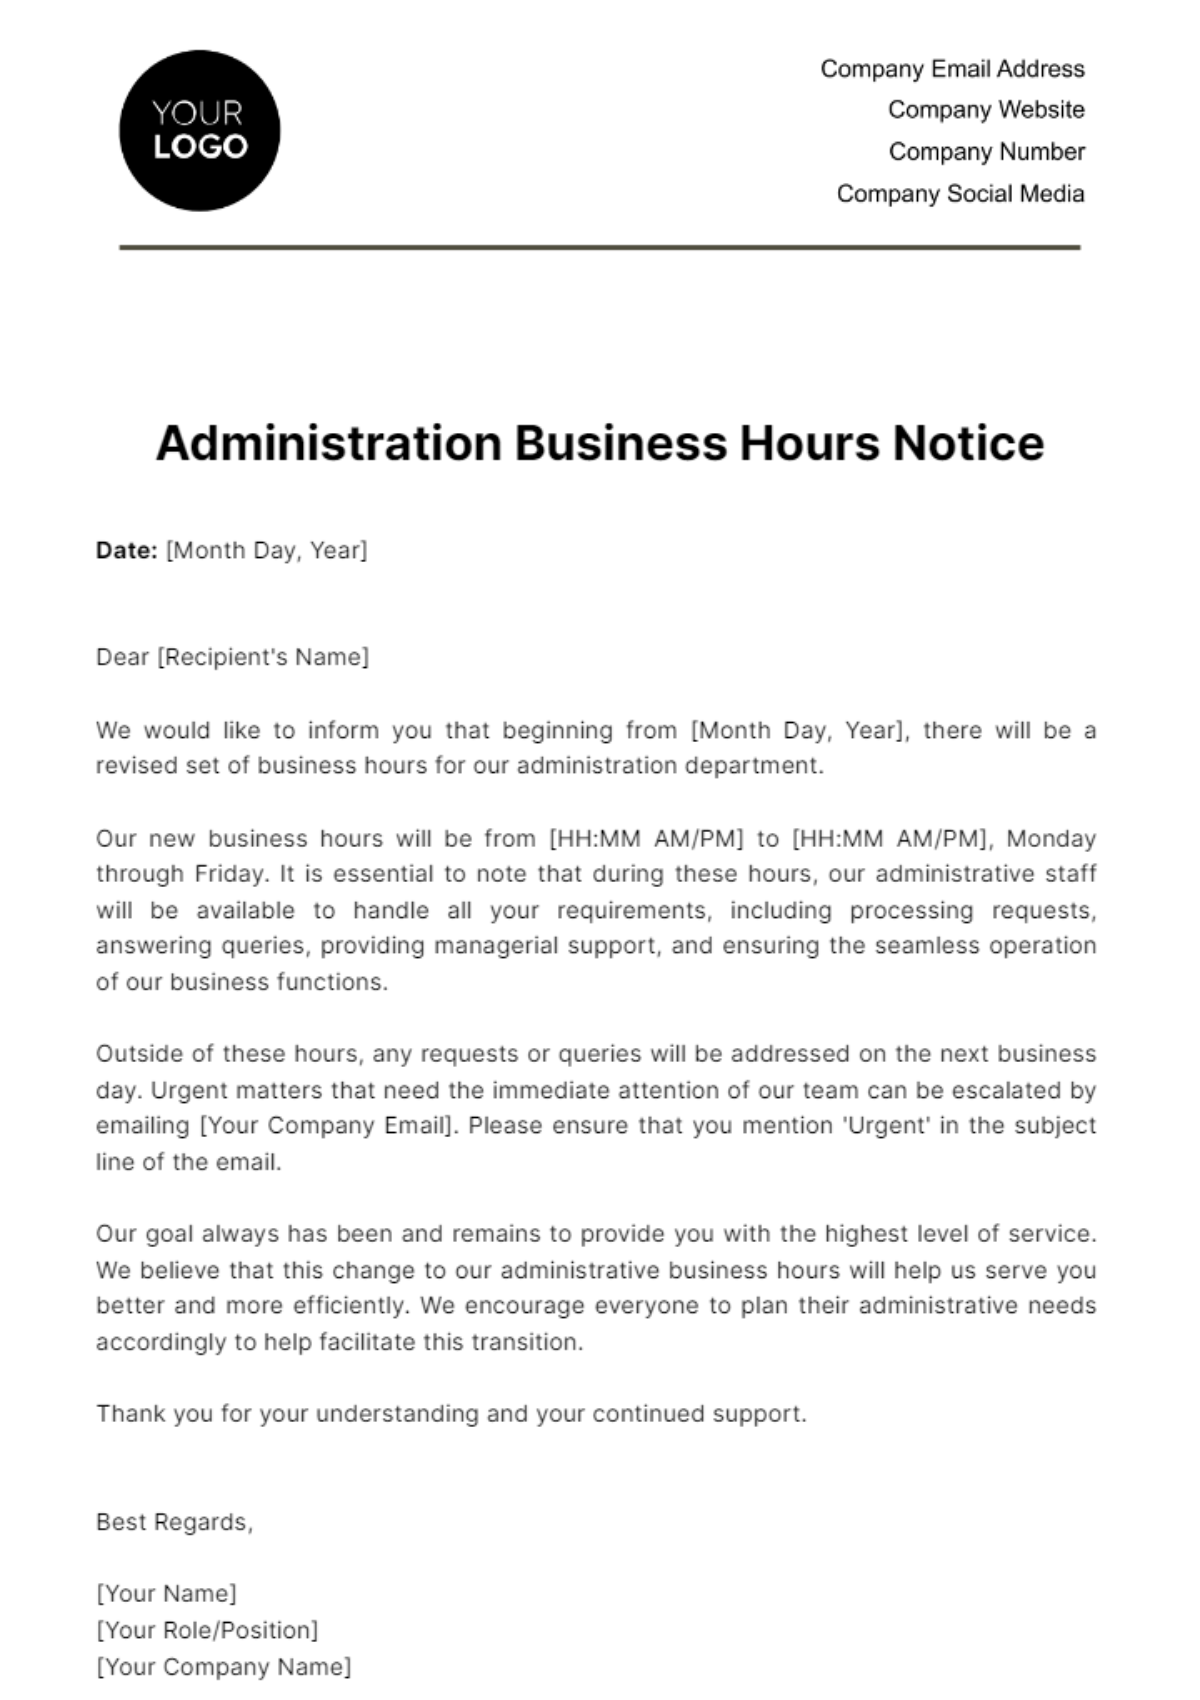 Free Administration Business Hours Notice Template